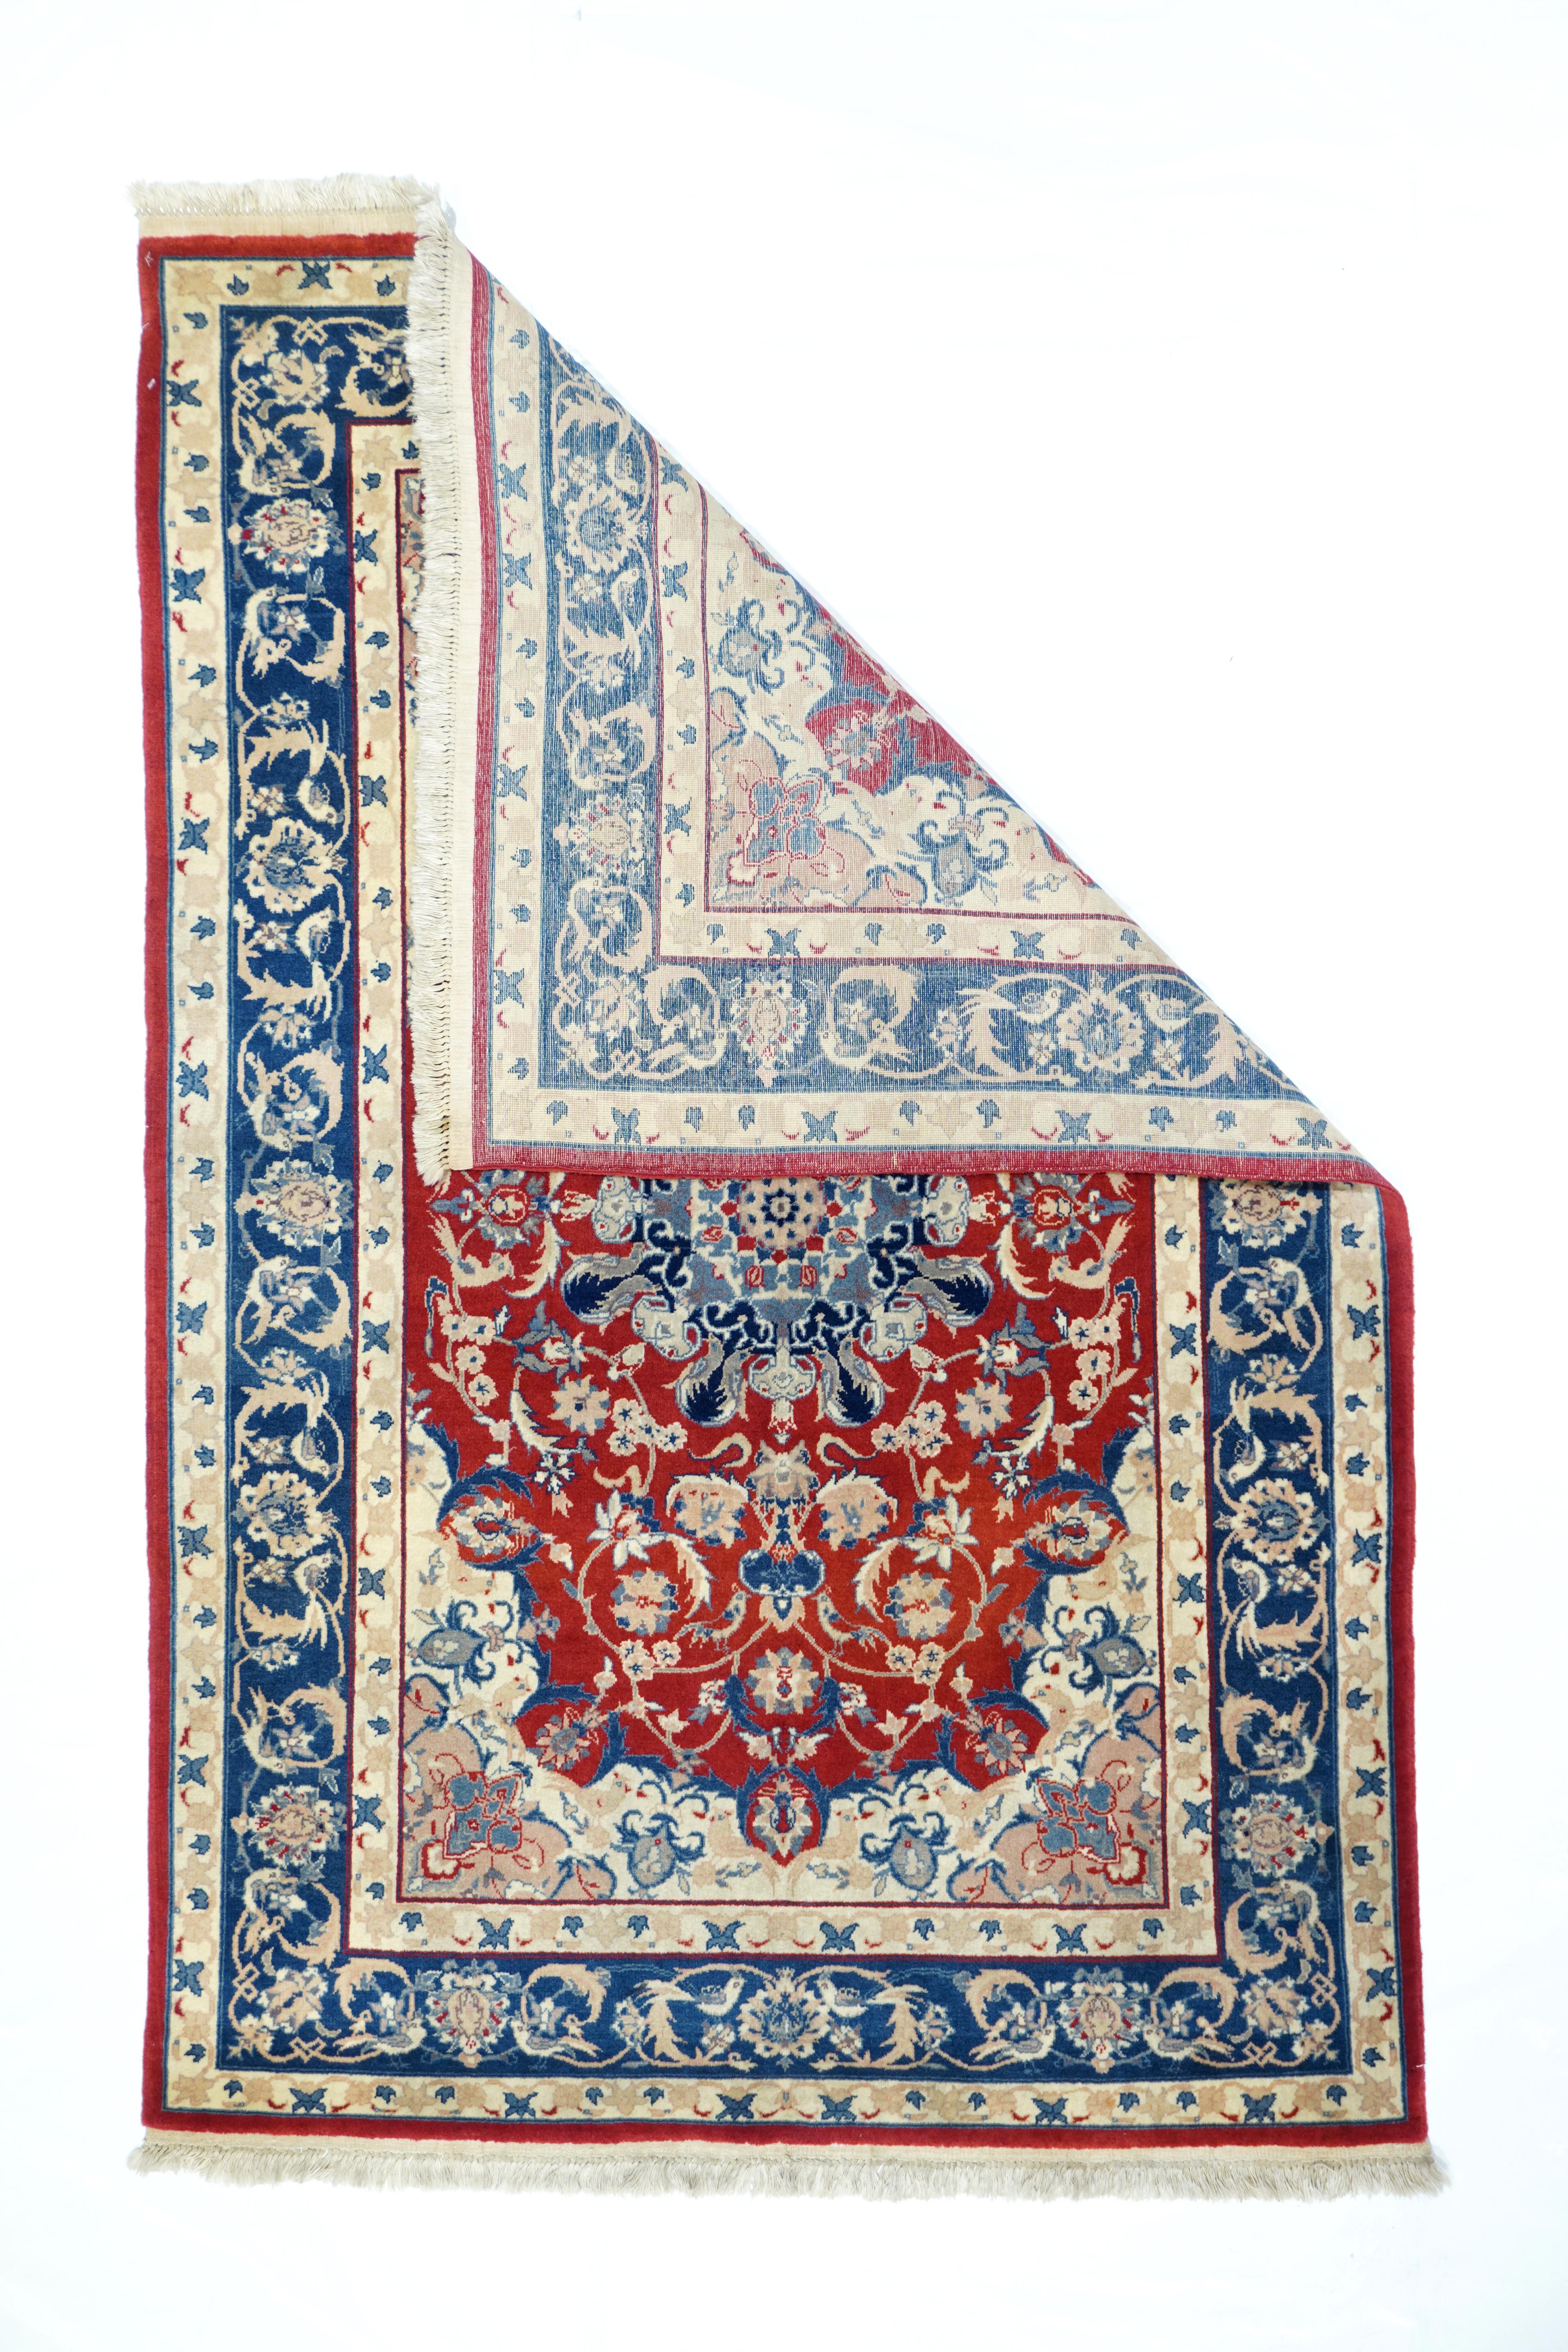 Vintage Isfahan rug¬†4' x 6'. The saturated red field features a variety of sickle, lancet and saz leaves, along with rosette groups, palmettes and small birds, all enclosing a teal and navy round medallion with cloud bands, around a cream central